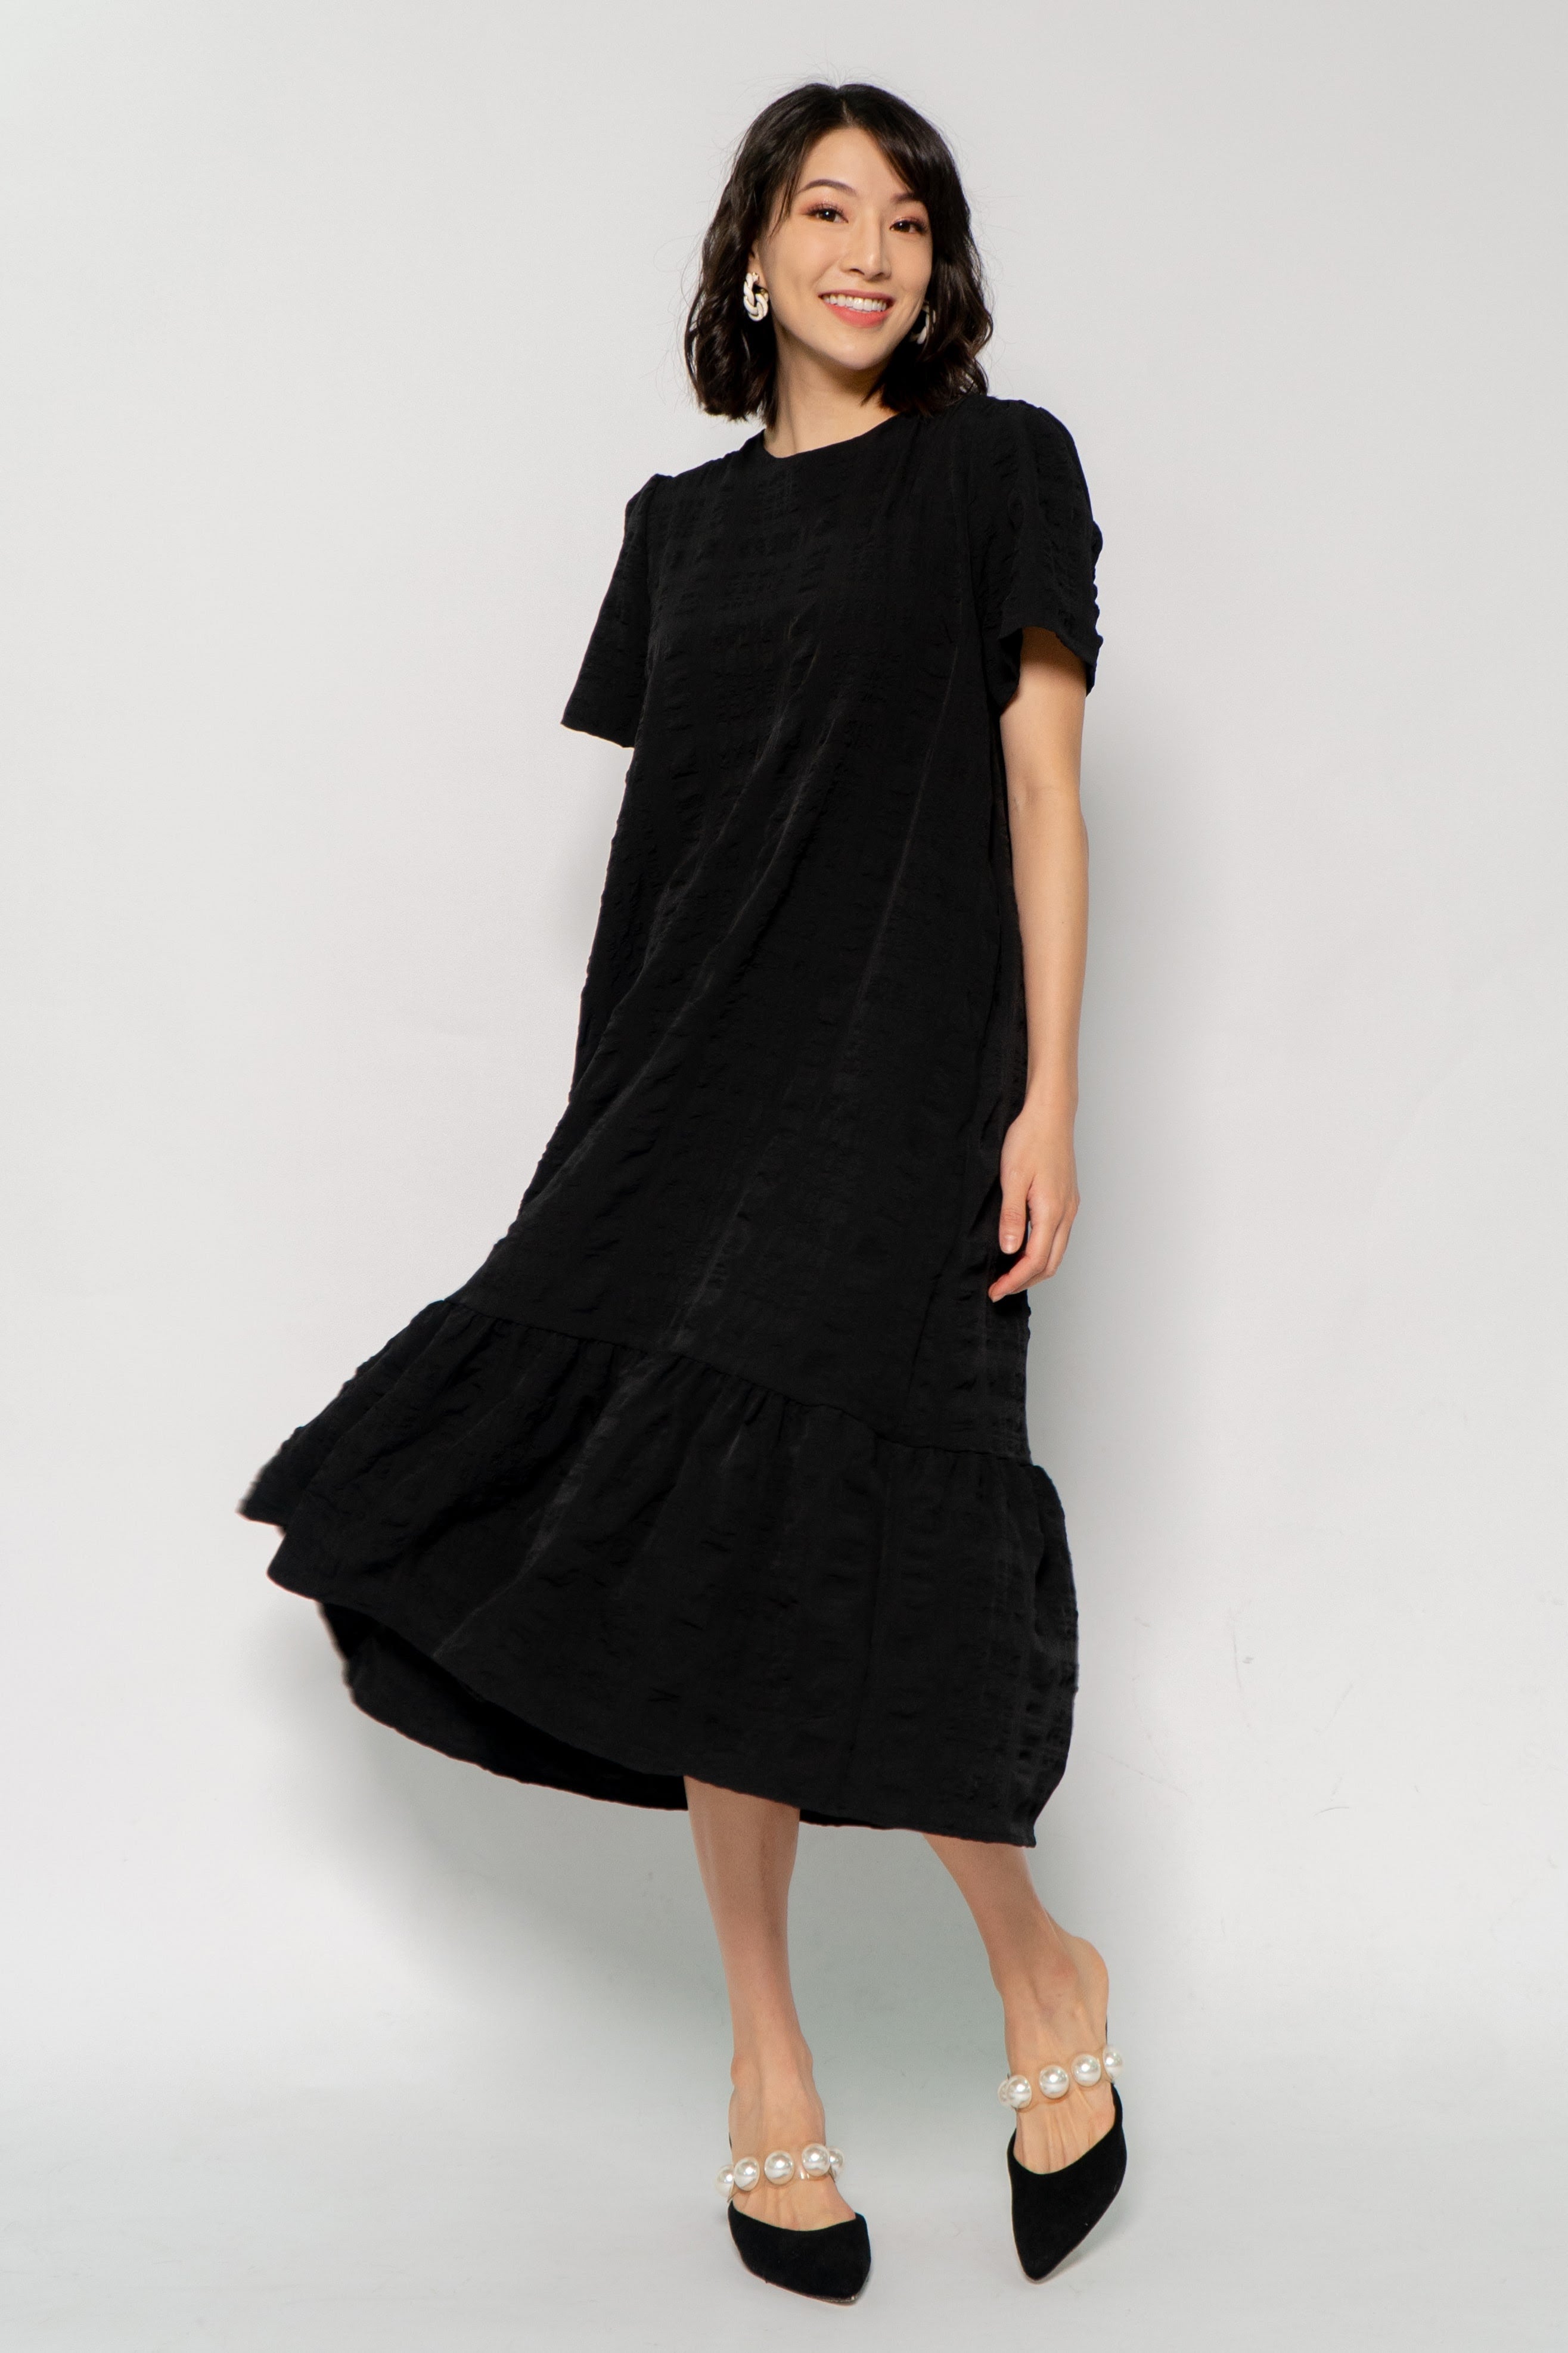 Xing Dress in Black Textured